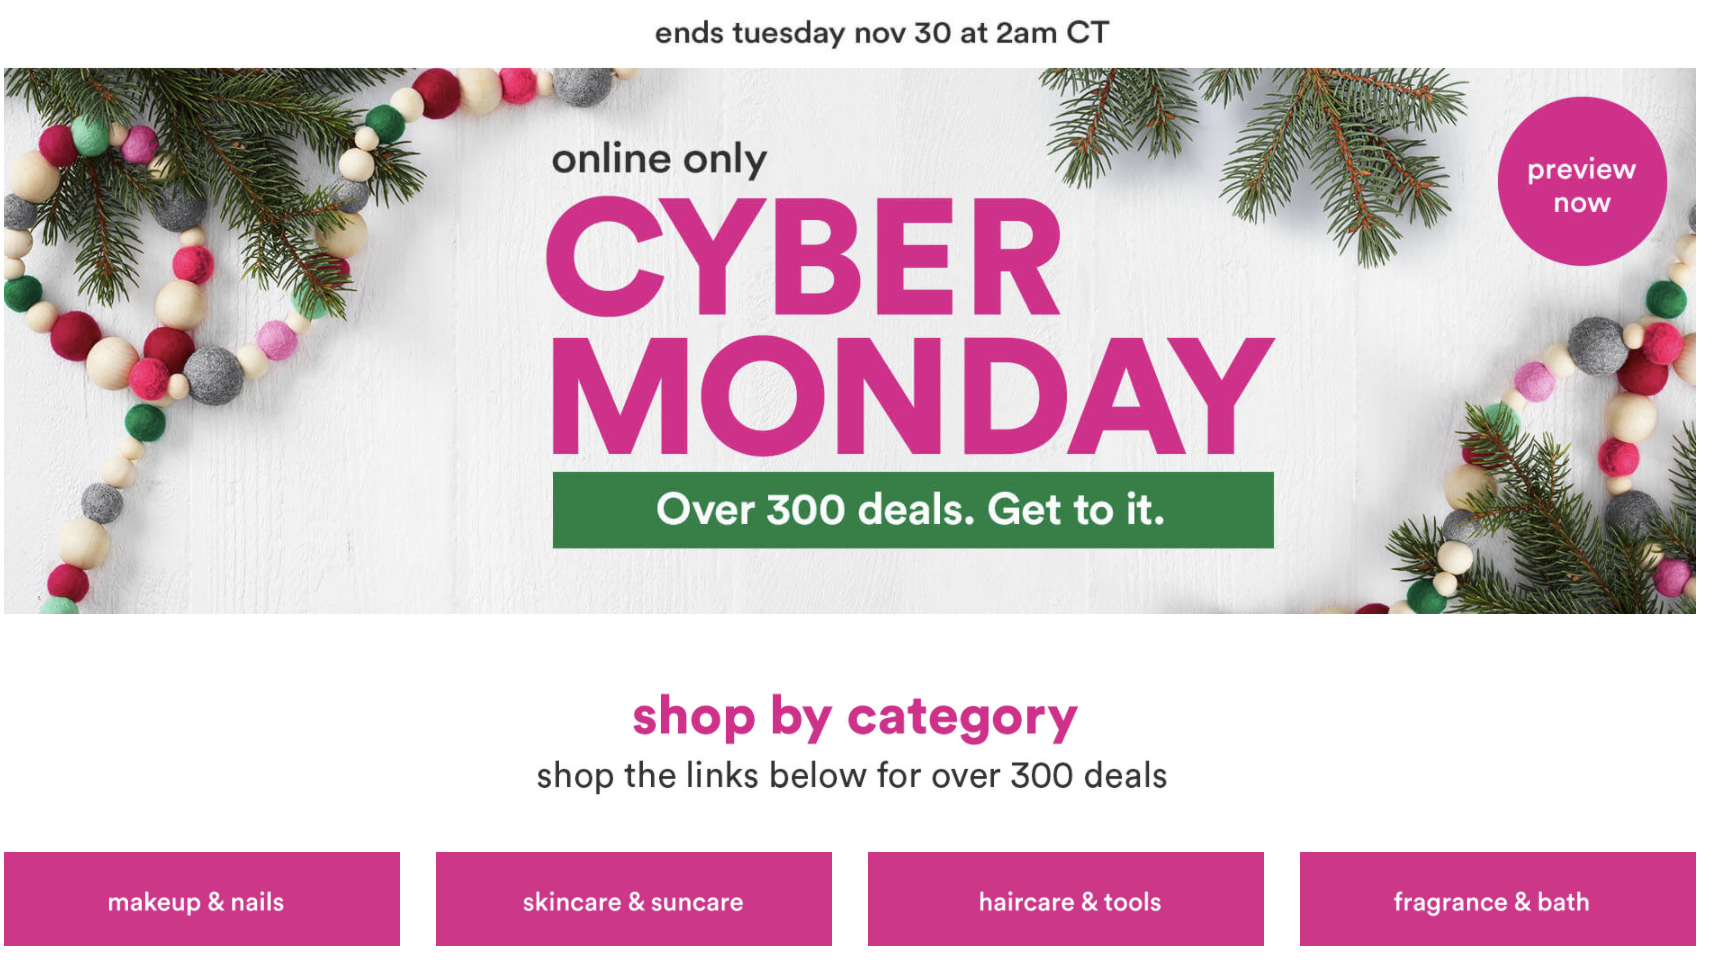 Ulta Cyber Monday Sale Preview (11/28 tonight 7pm CT 11/30 2am CT